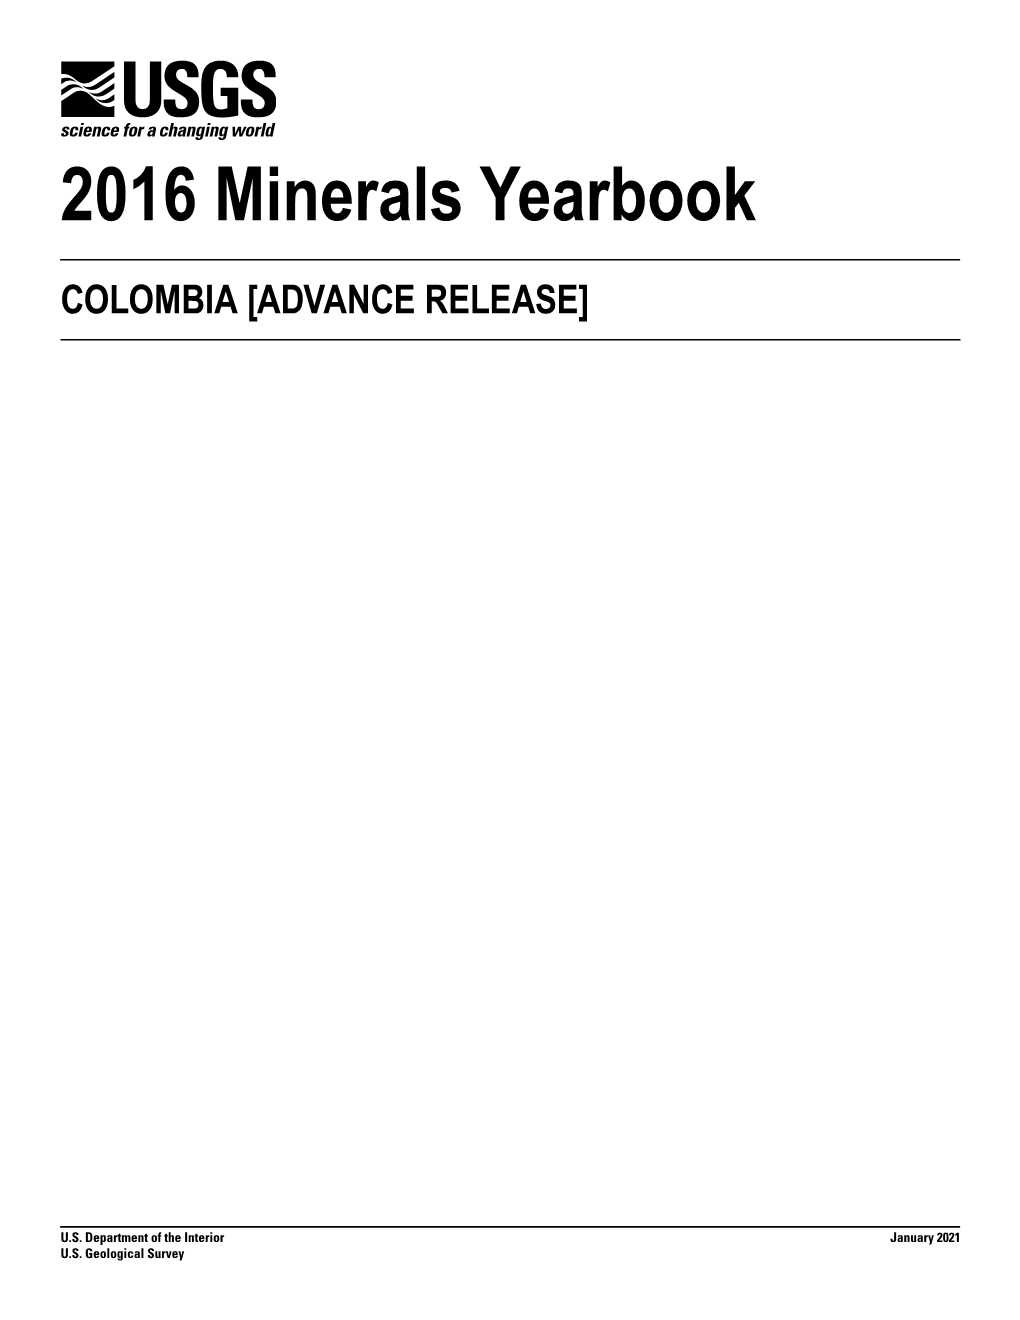 The Mineral Industry of Colombia in 2016